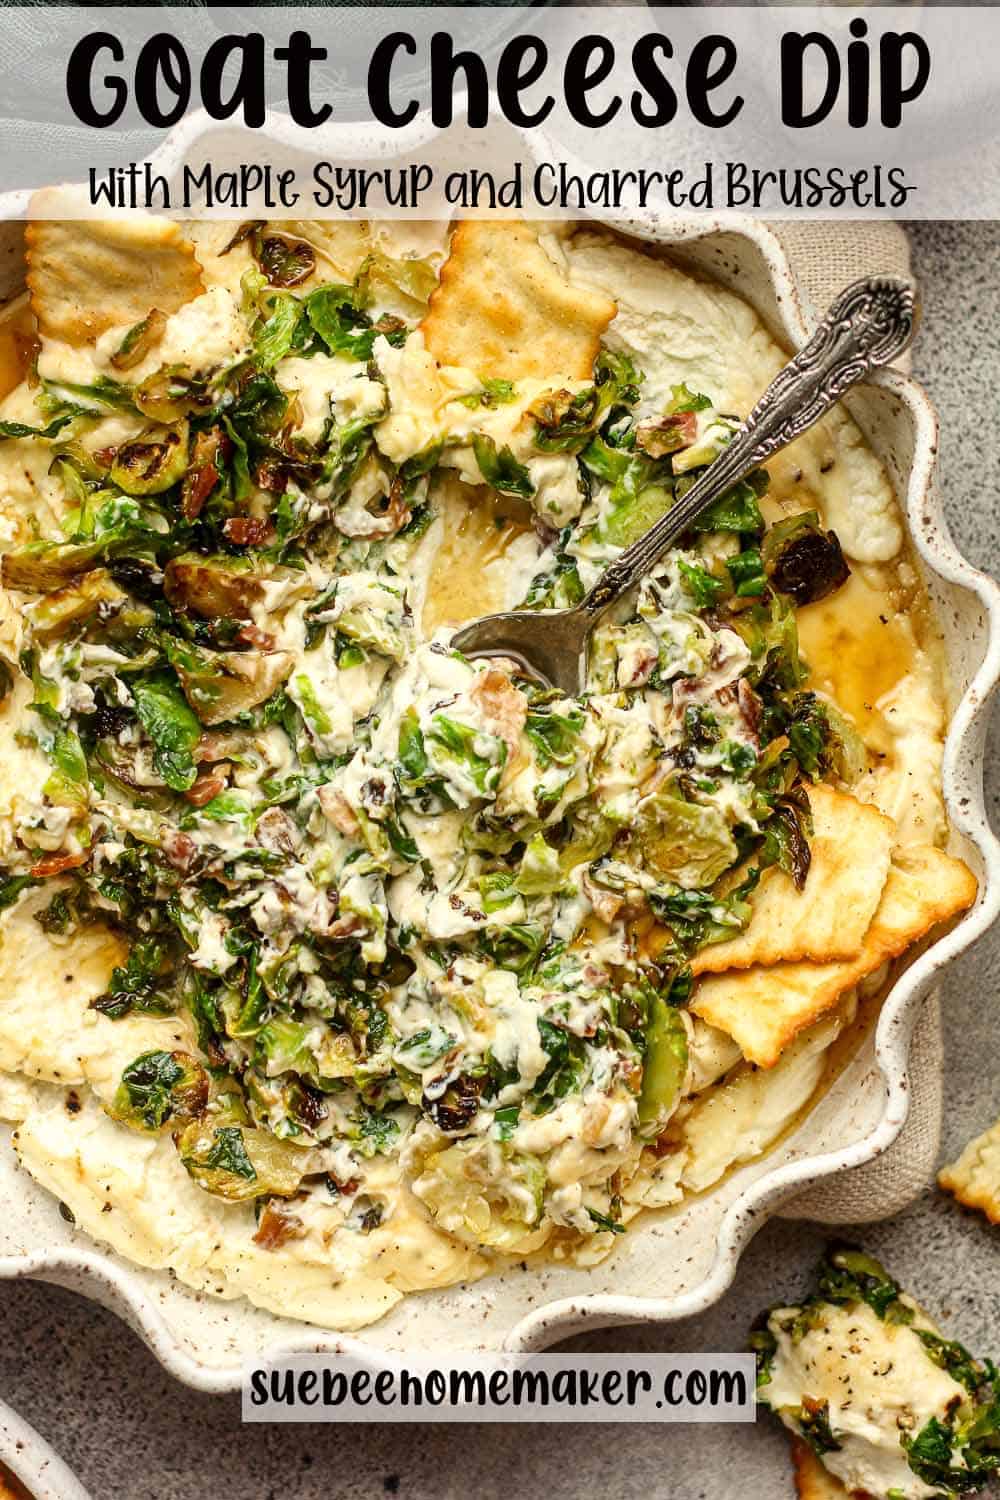 A pie pan of goat cheese dip with maple syrup and charred brussels sprouts.